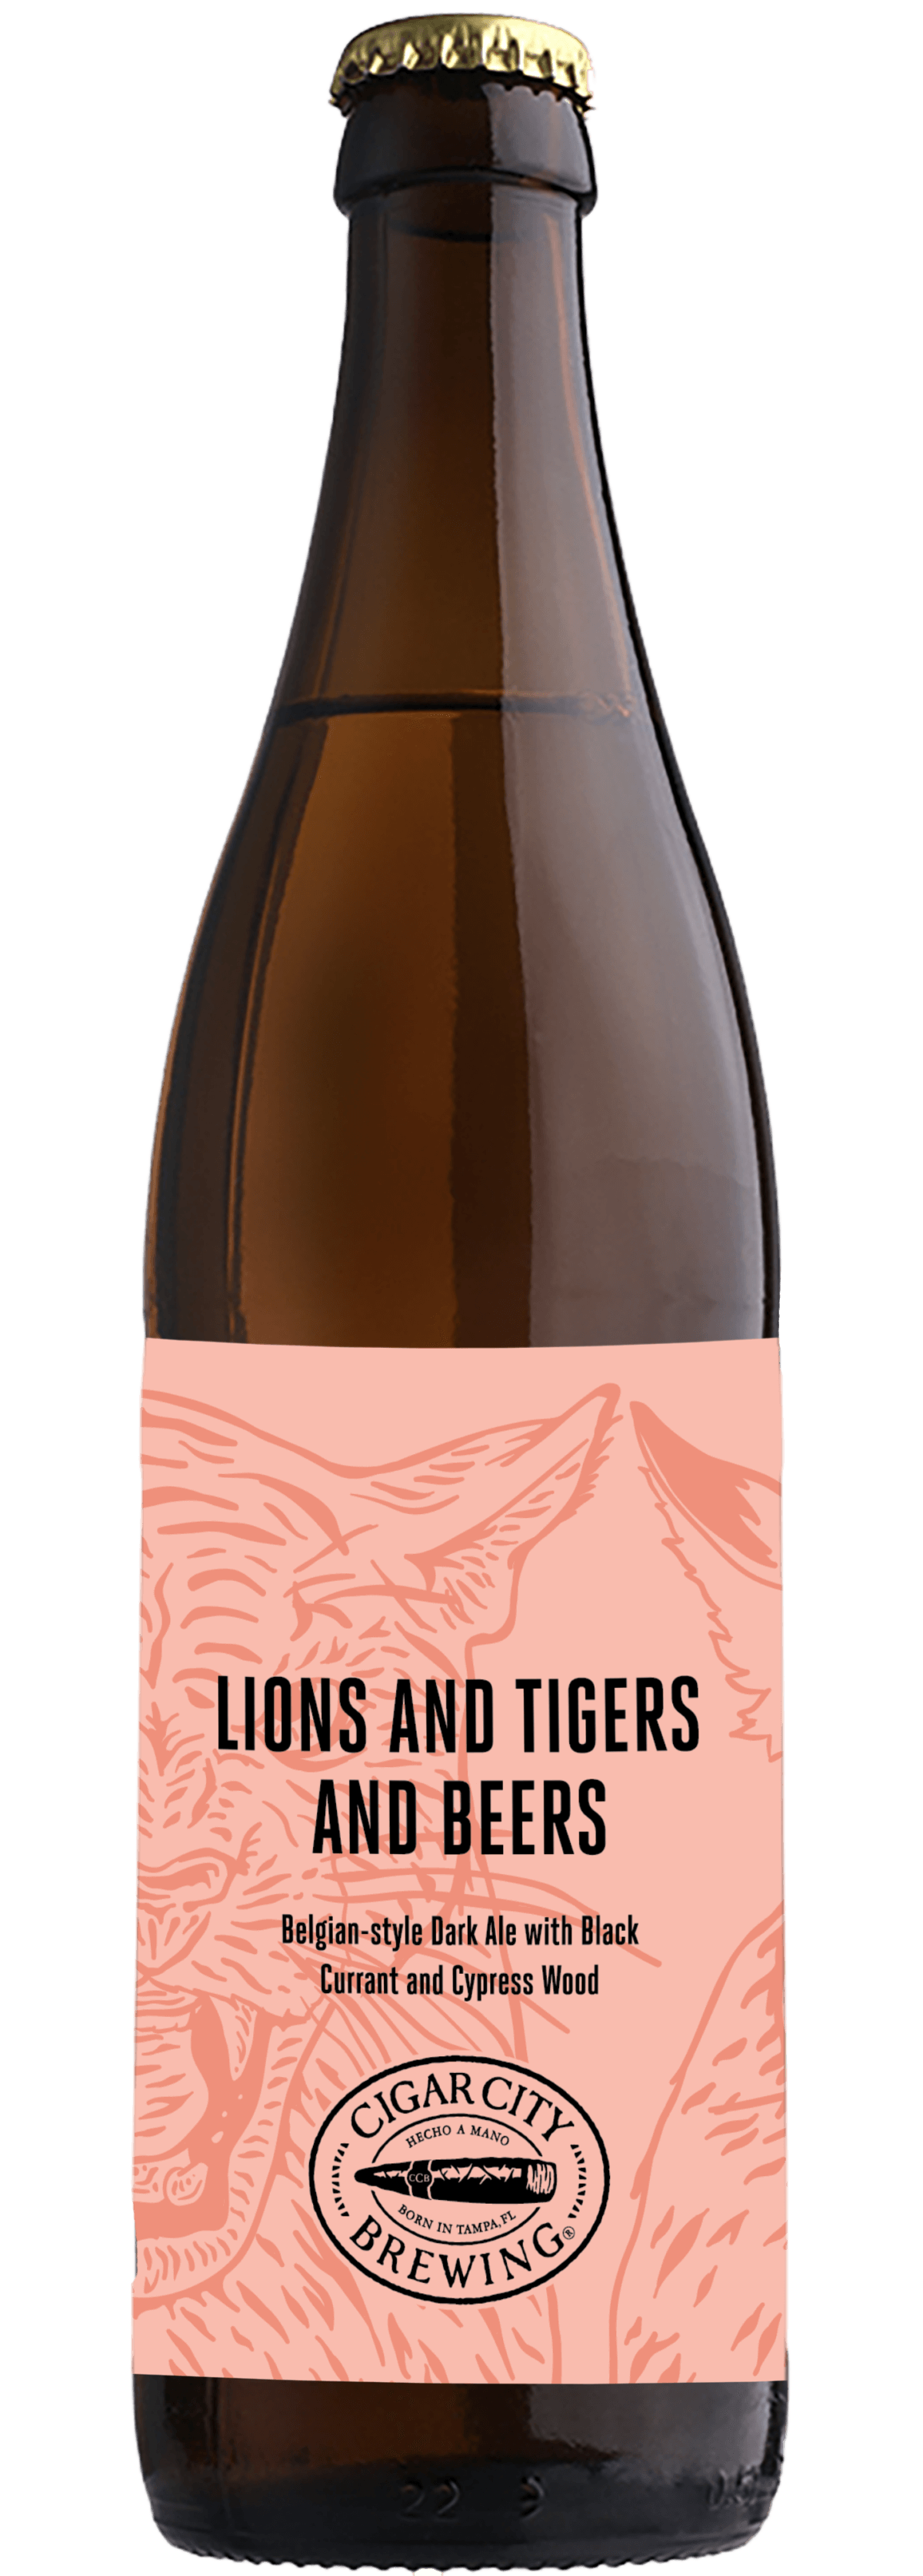 Lions and Tigers and Beers